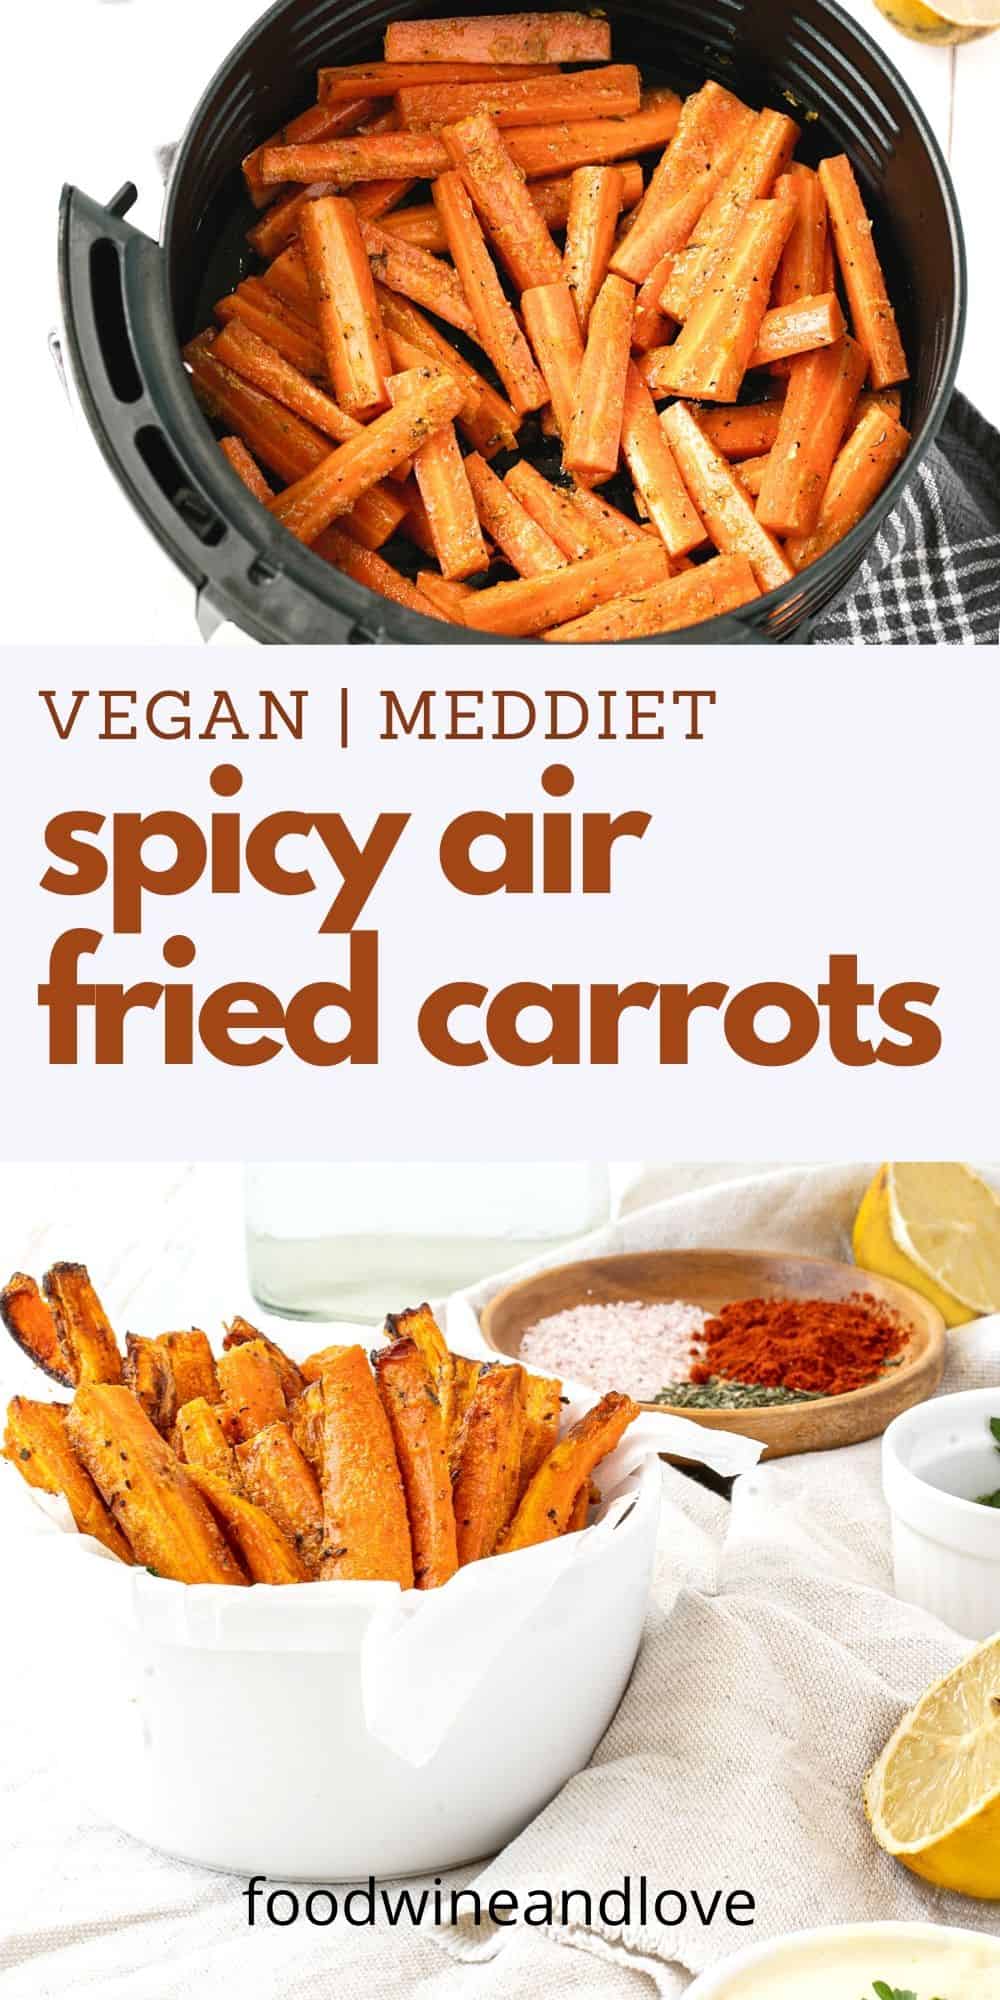 Spicy Air Fried Carrots